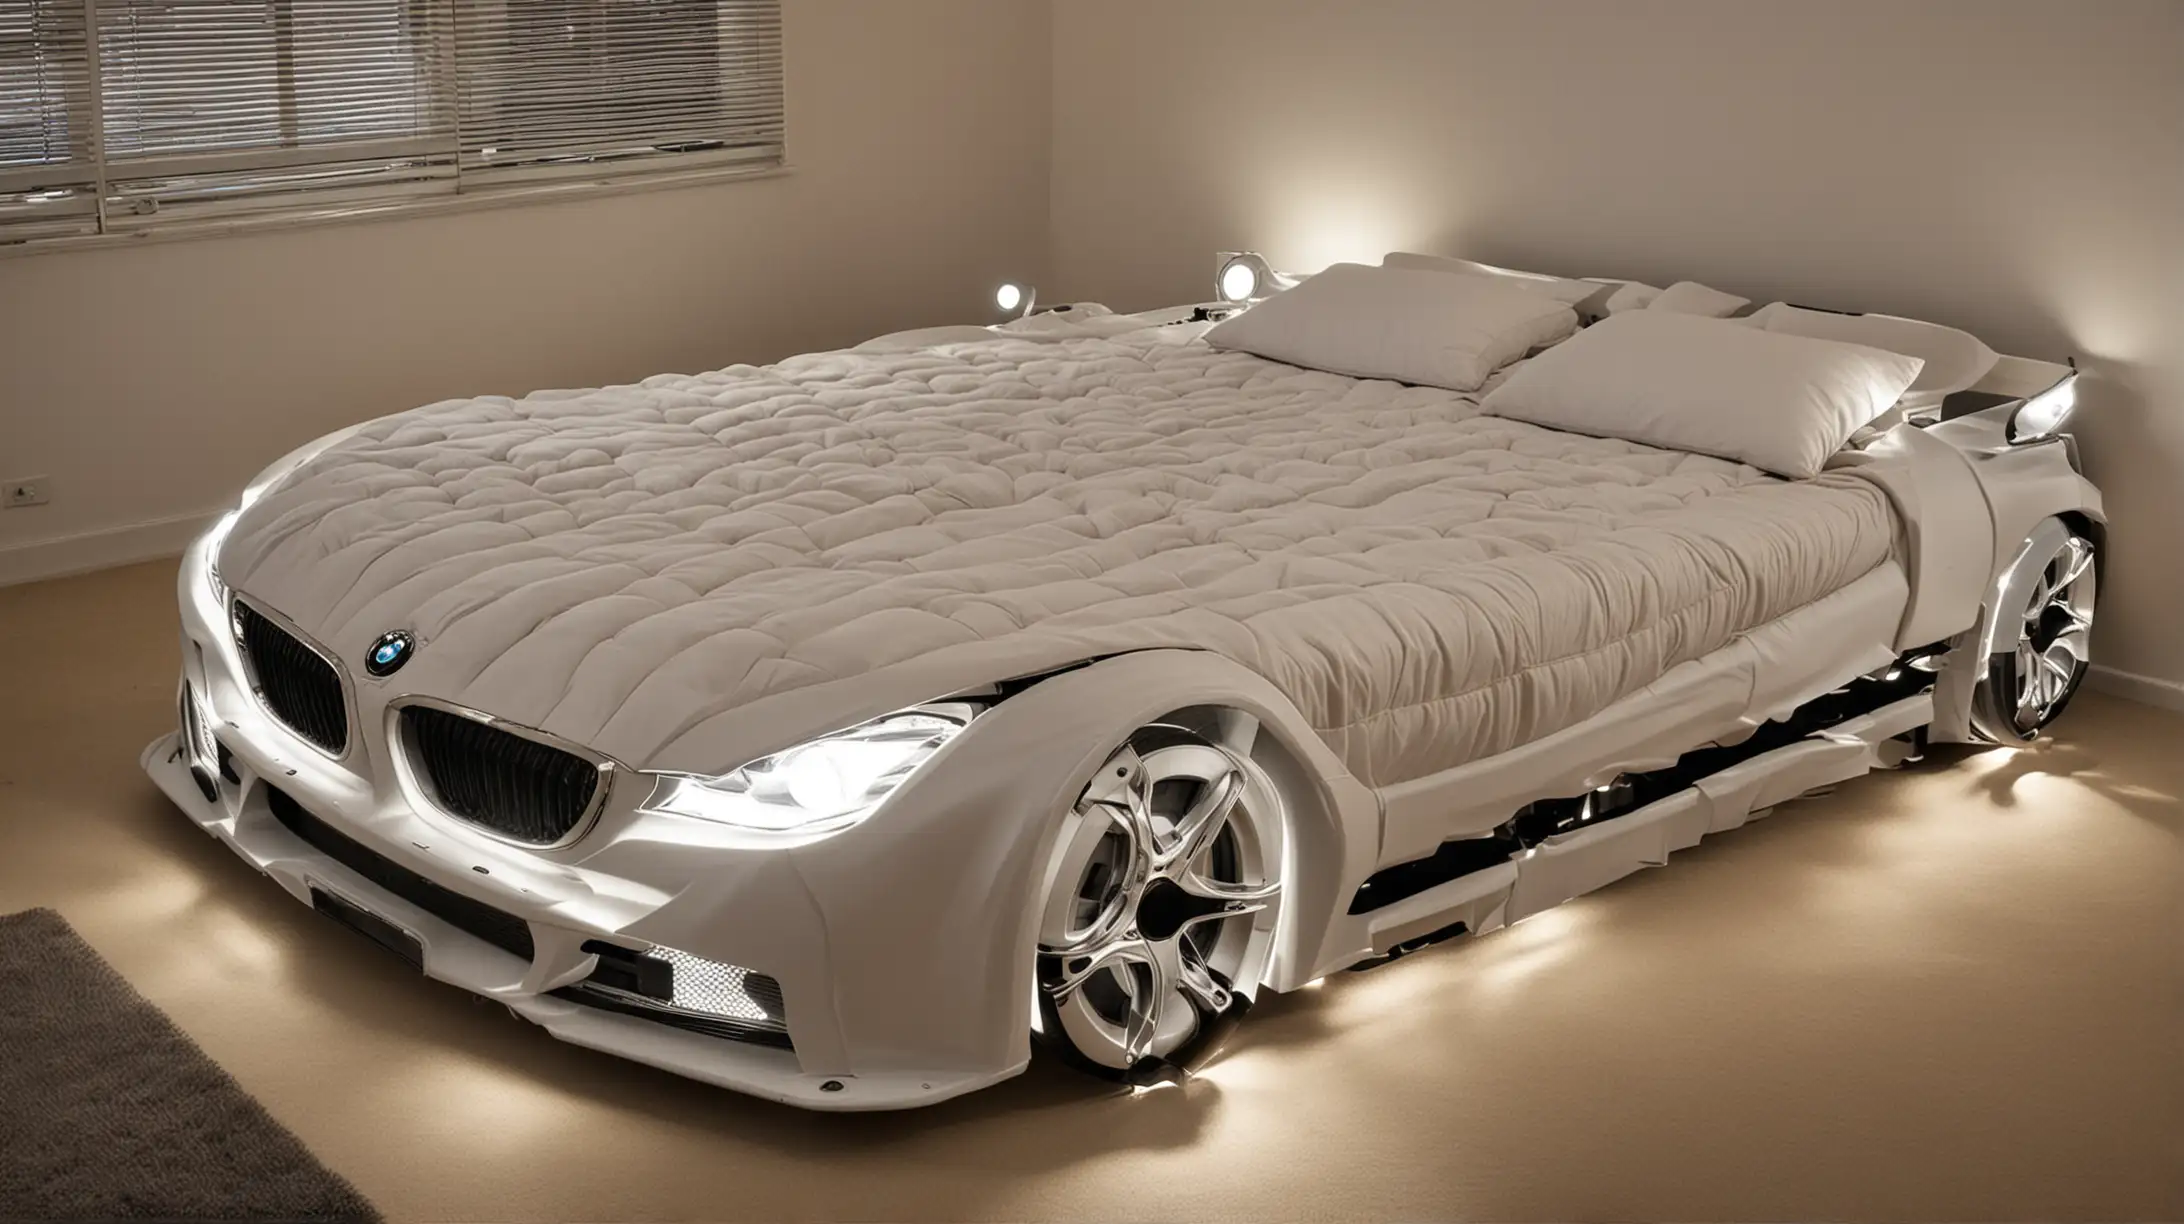 BMW Car Shaped Double Bed with Headlights On